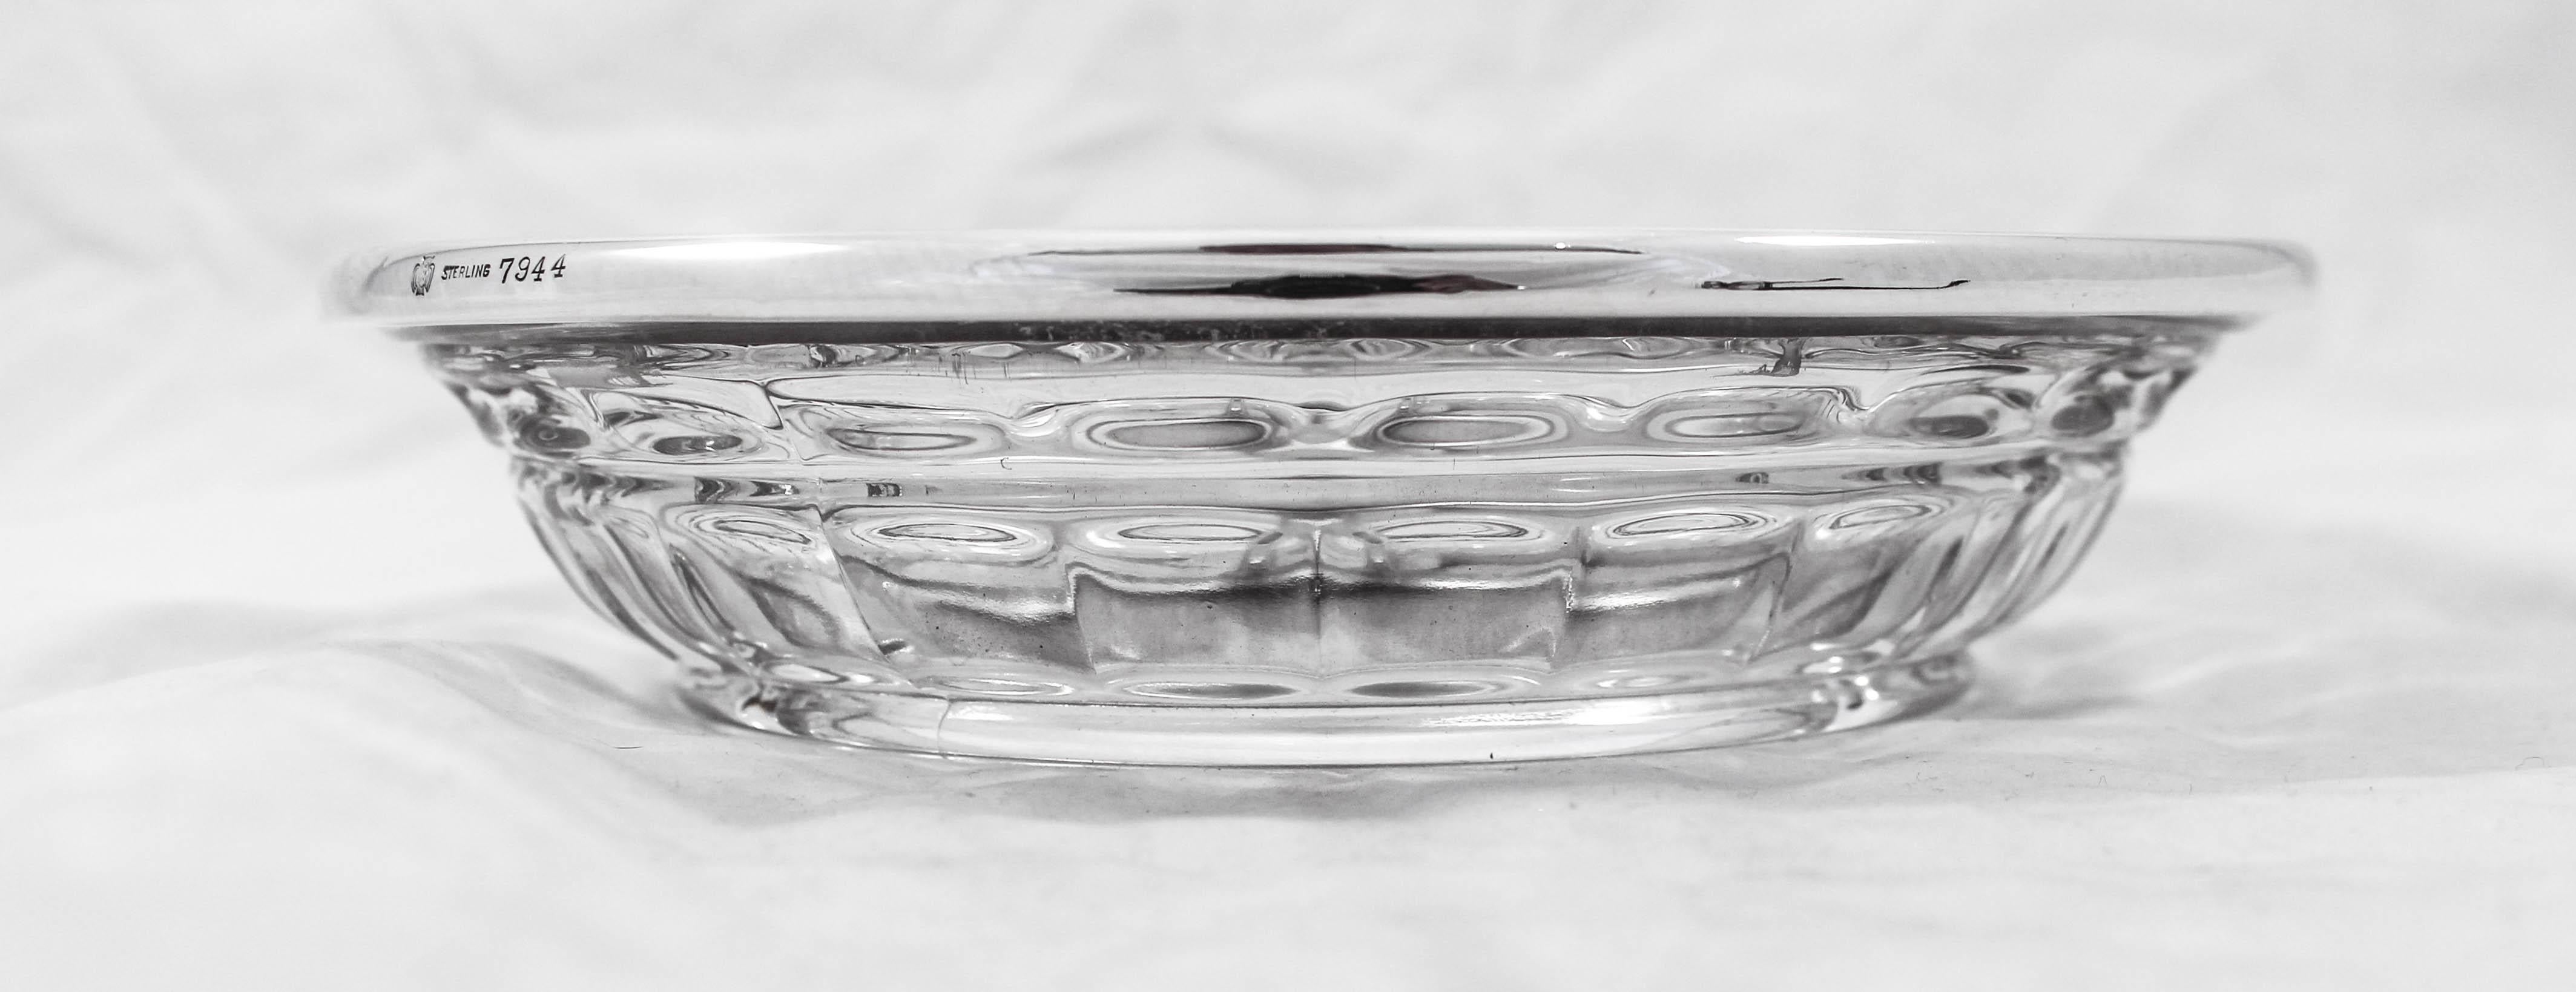 We are offering this sterling silver and crystal sectional. It has a sterling rim with a simple motif around the edge. The crystal has a symmetrical pattern with indentations. The center is divided into three equal sections. Fill it with nuts and